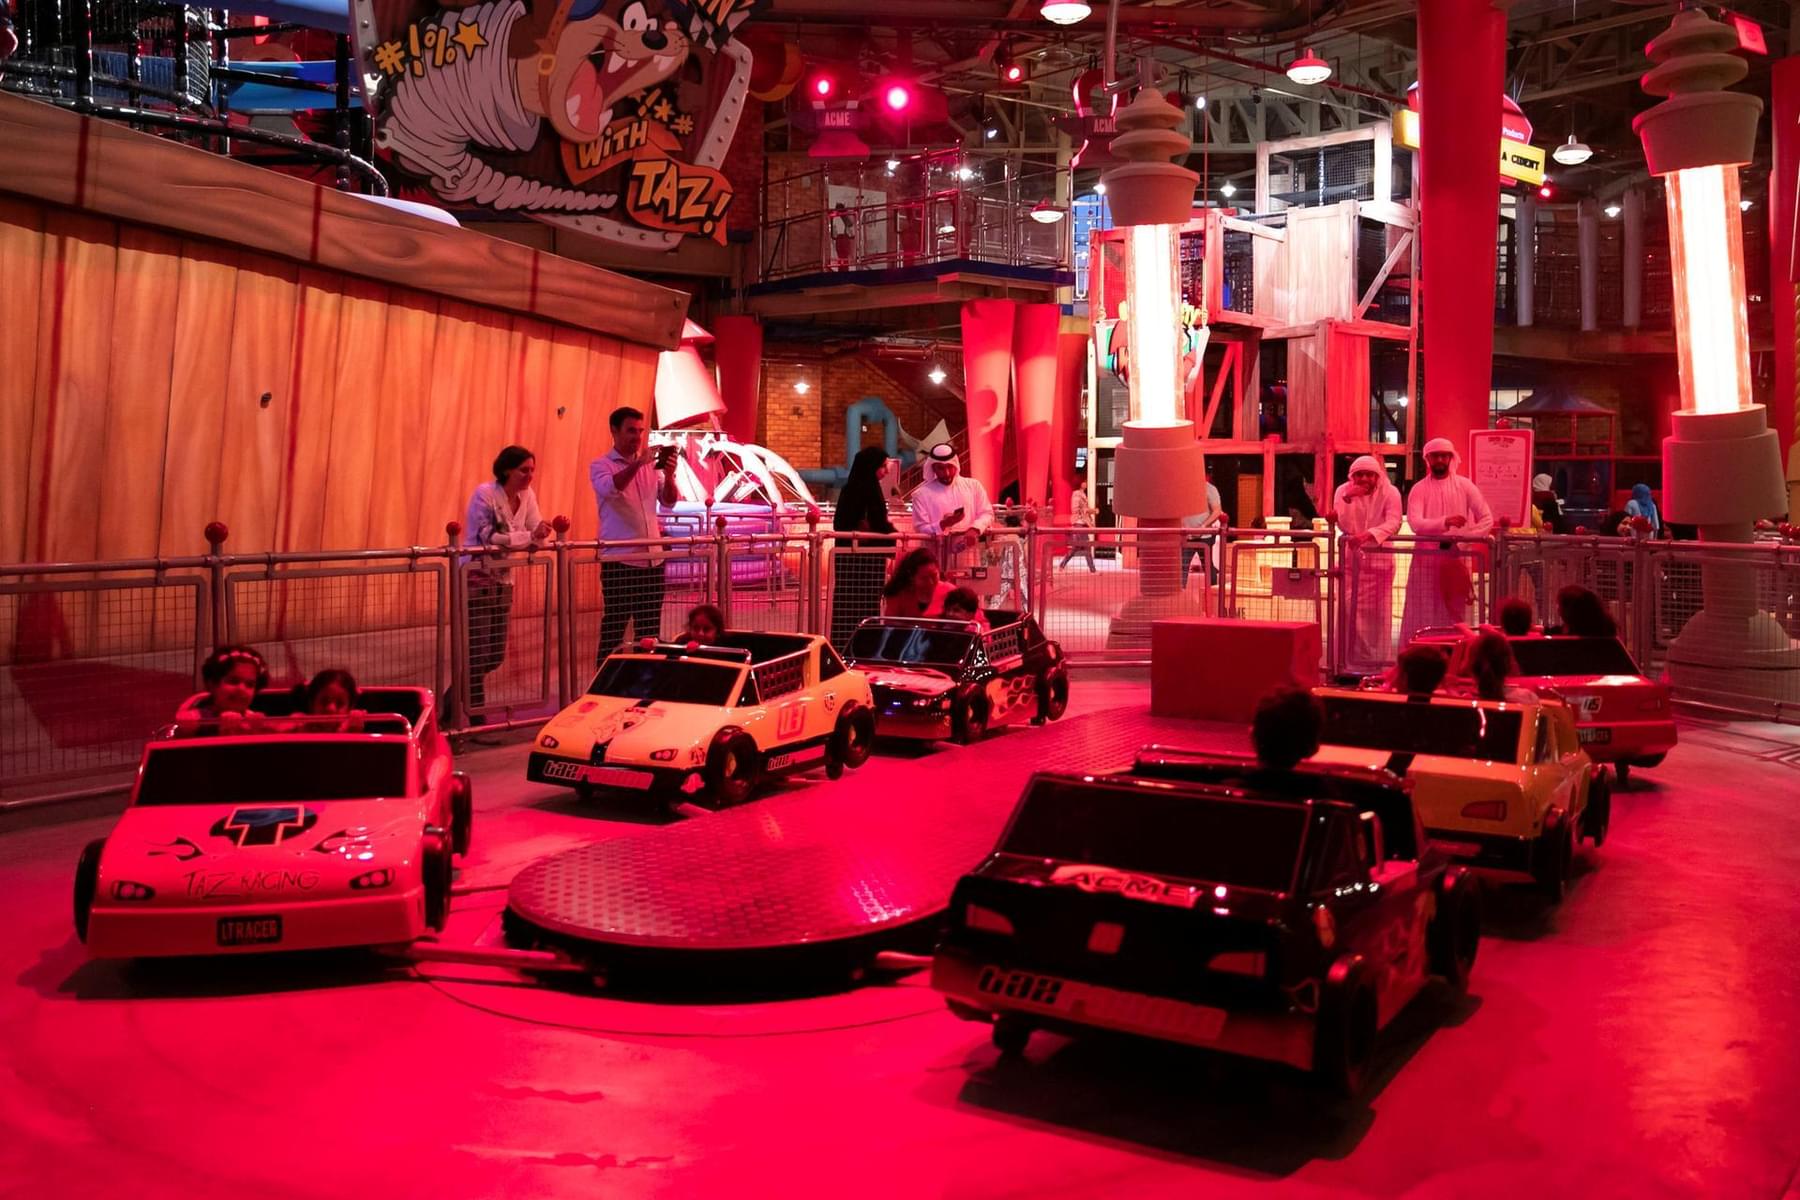 Warner Bros Abu Dhabi has rides exclusively for children 